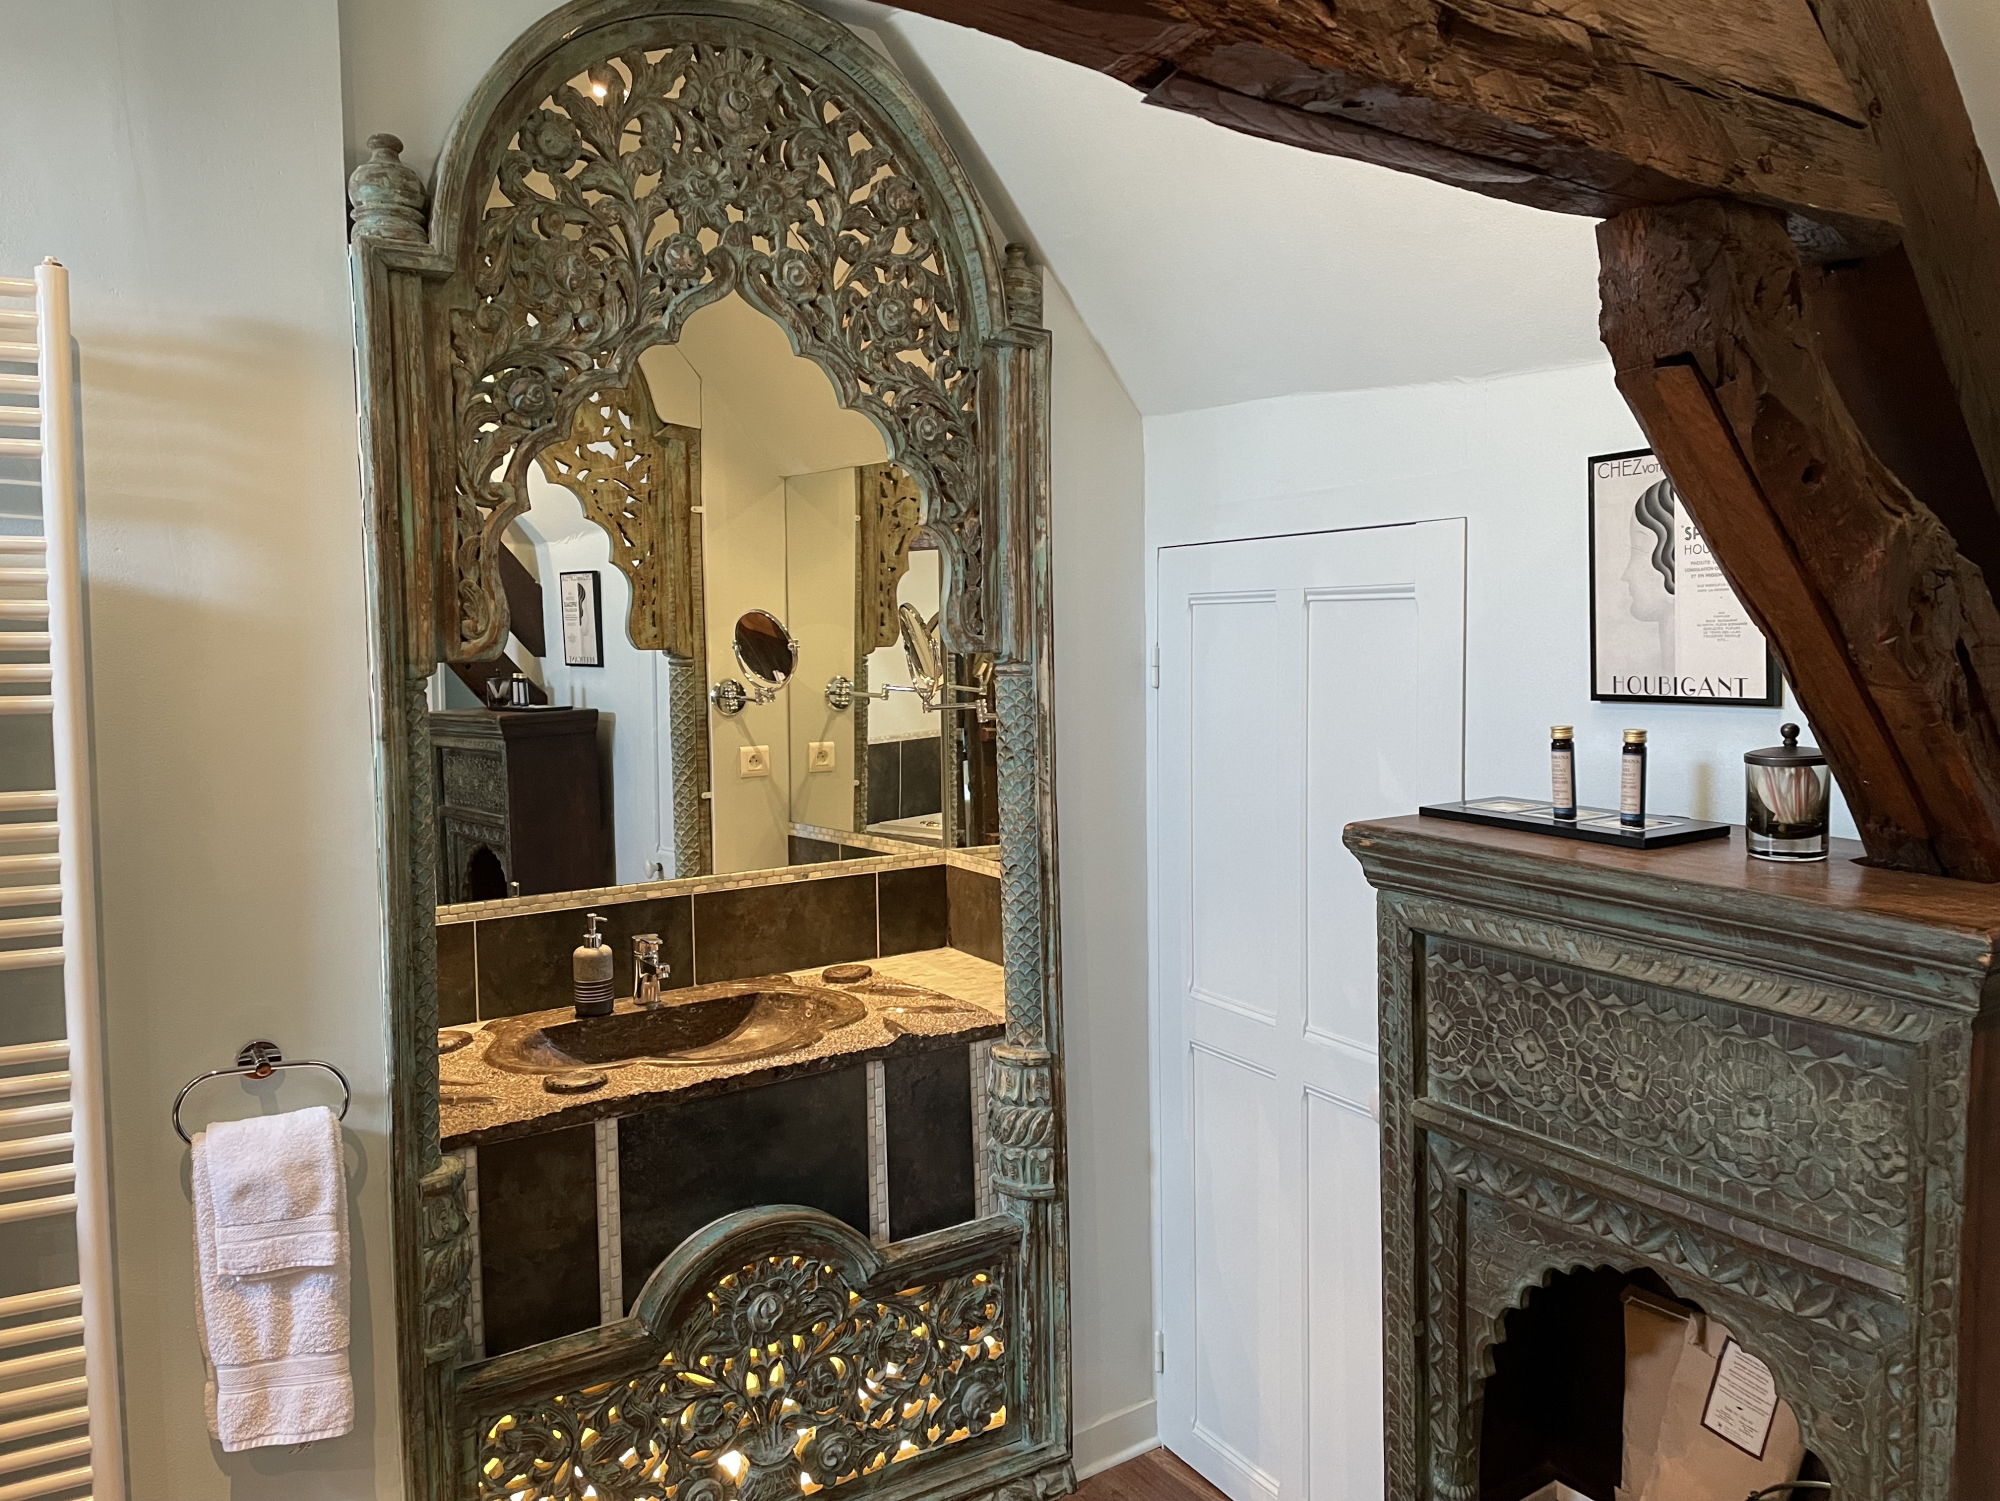 Hand Carved Moorish Cabinets and stone sink are some of the unique features of the Macassar suite